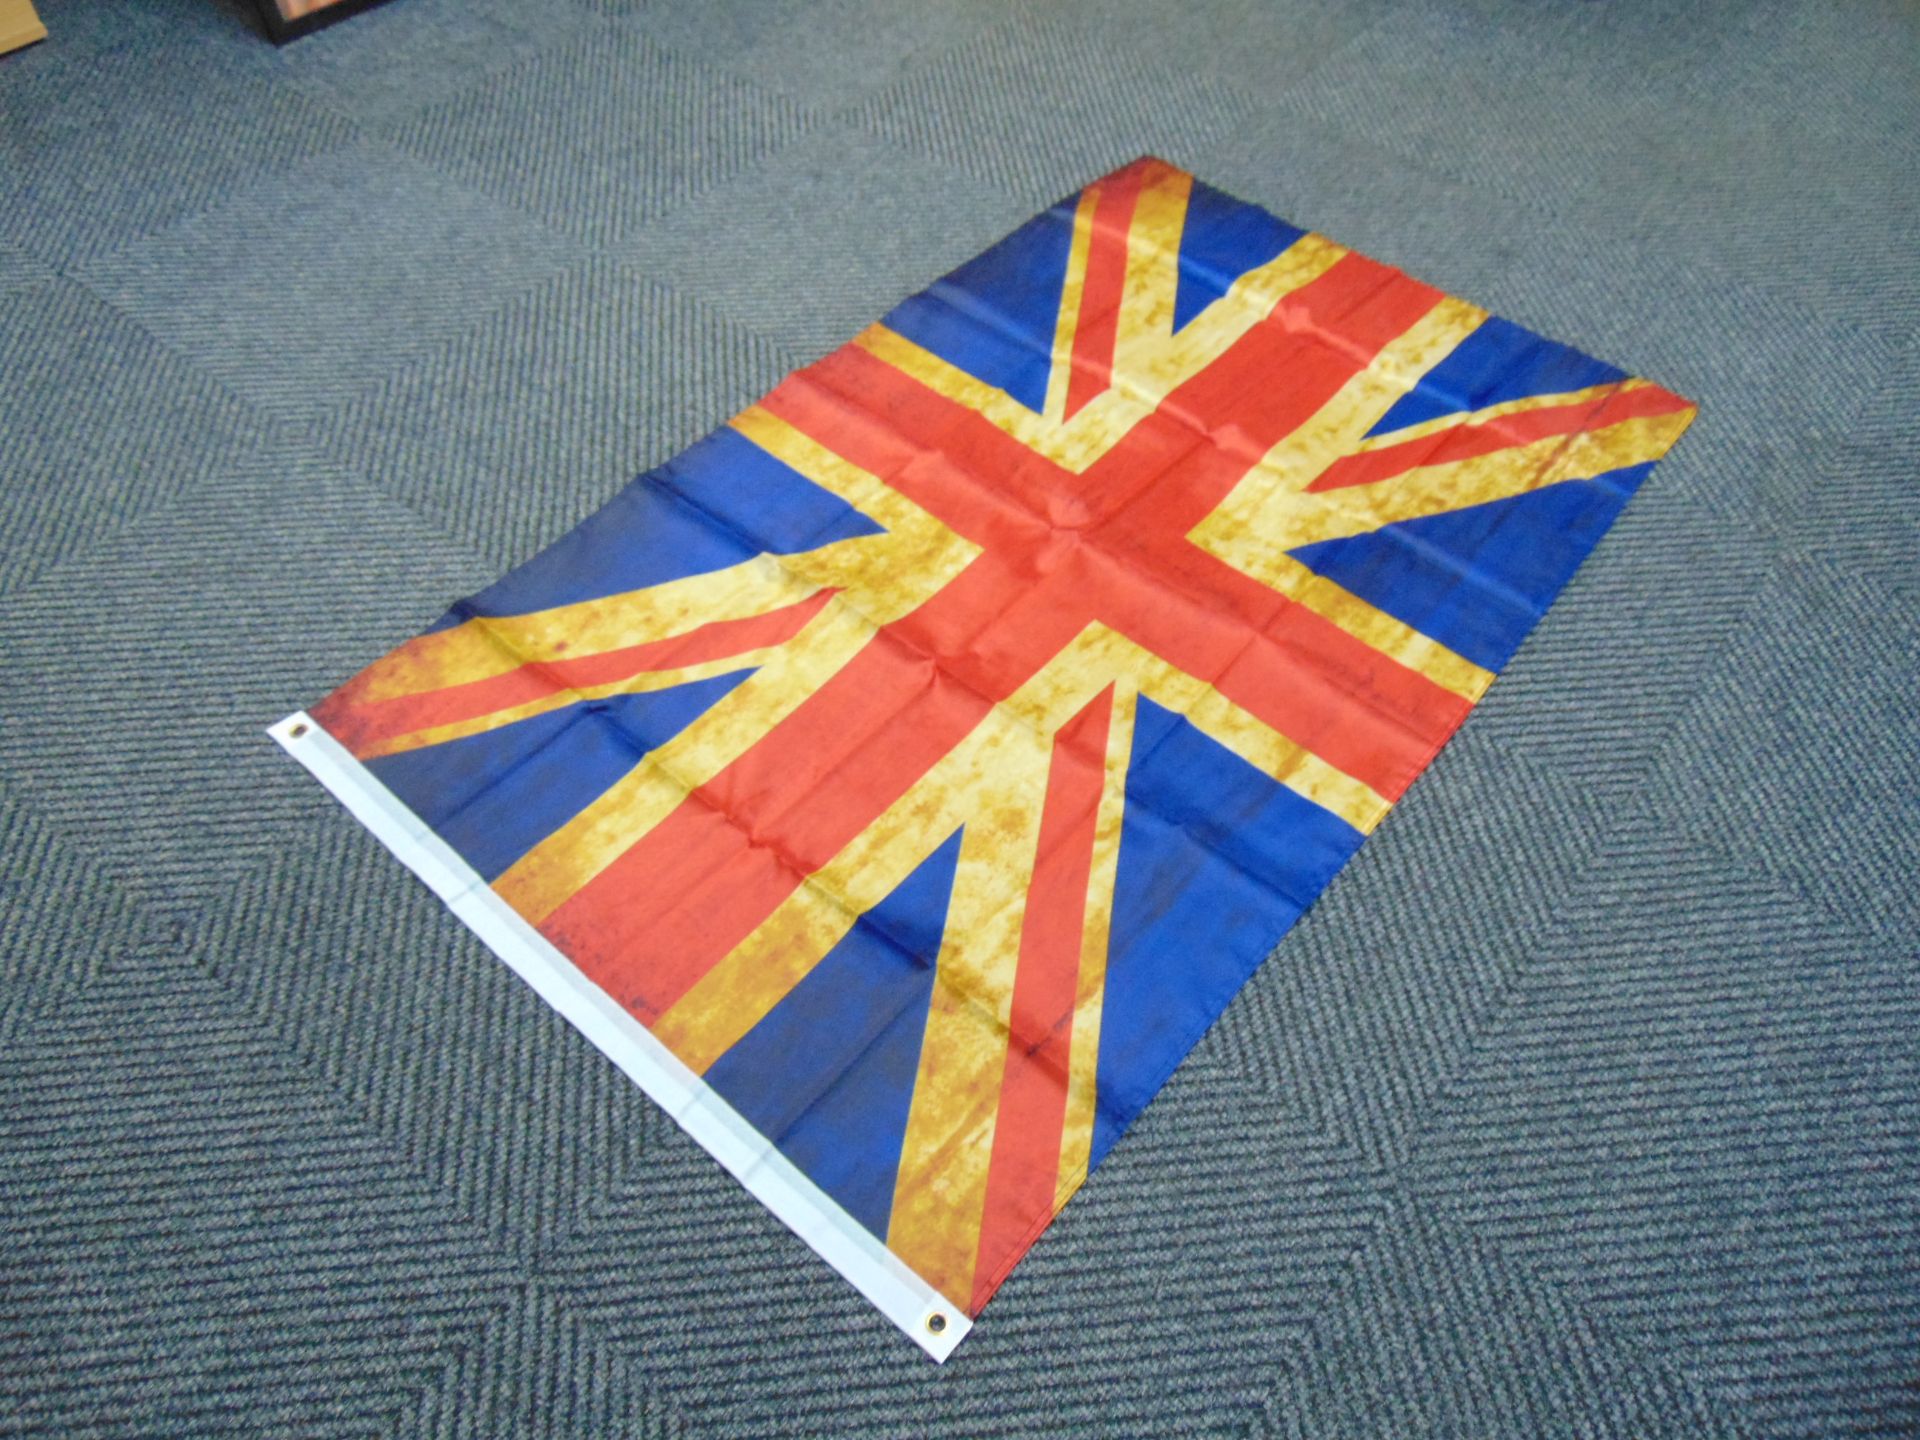 Union Jack Flag - 5ft x 3ft with Metal Eyelets. - Image 4 of 4